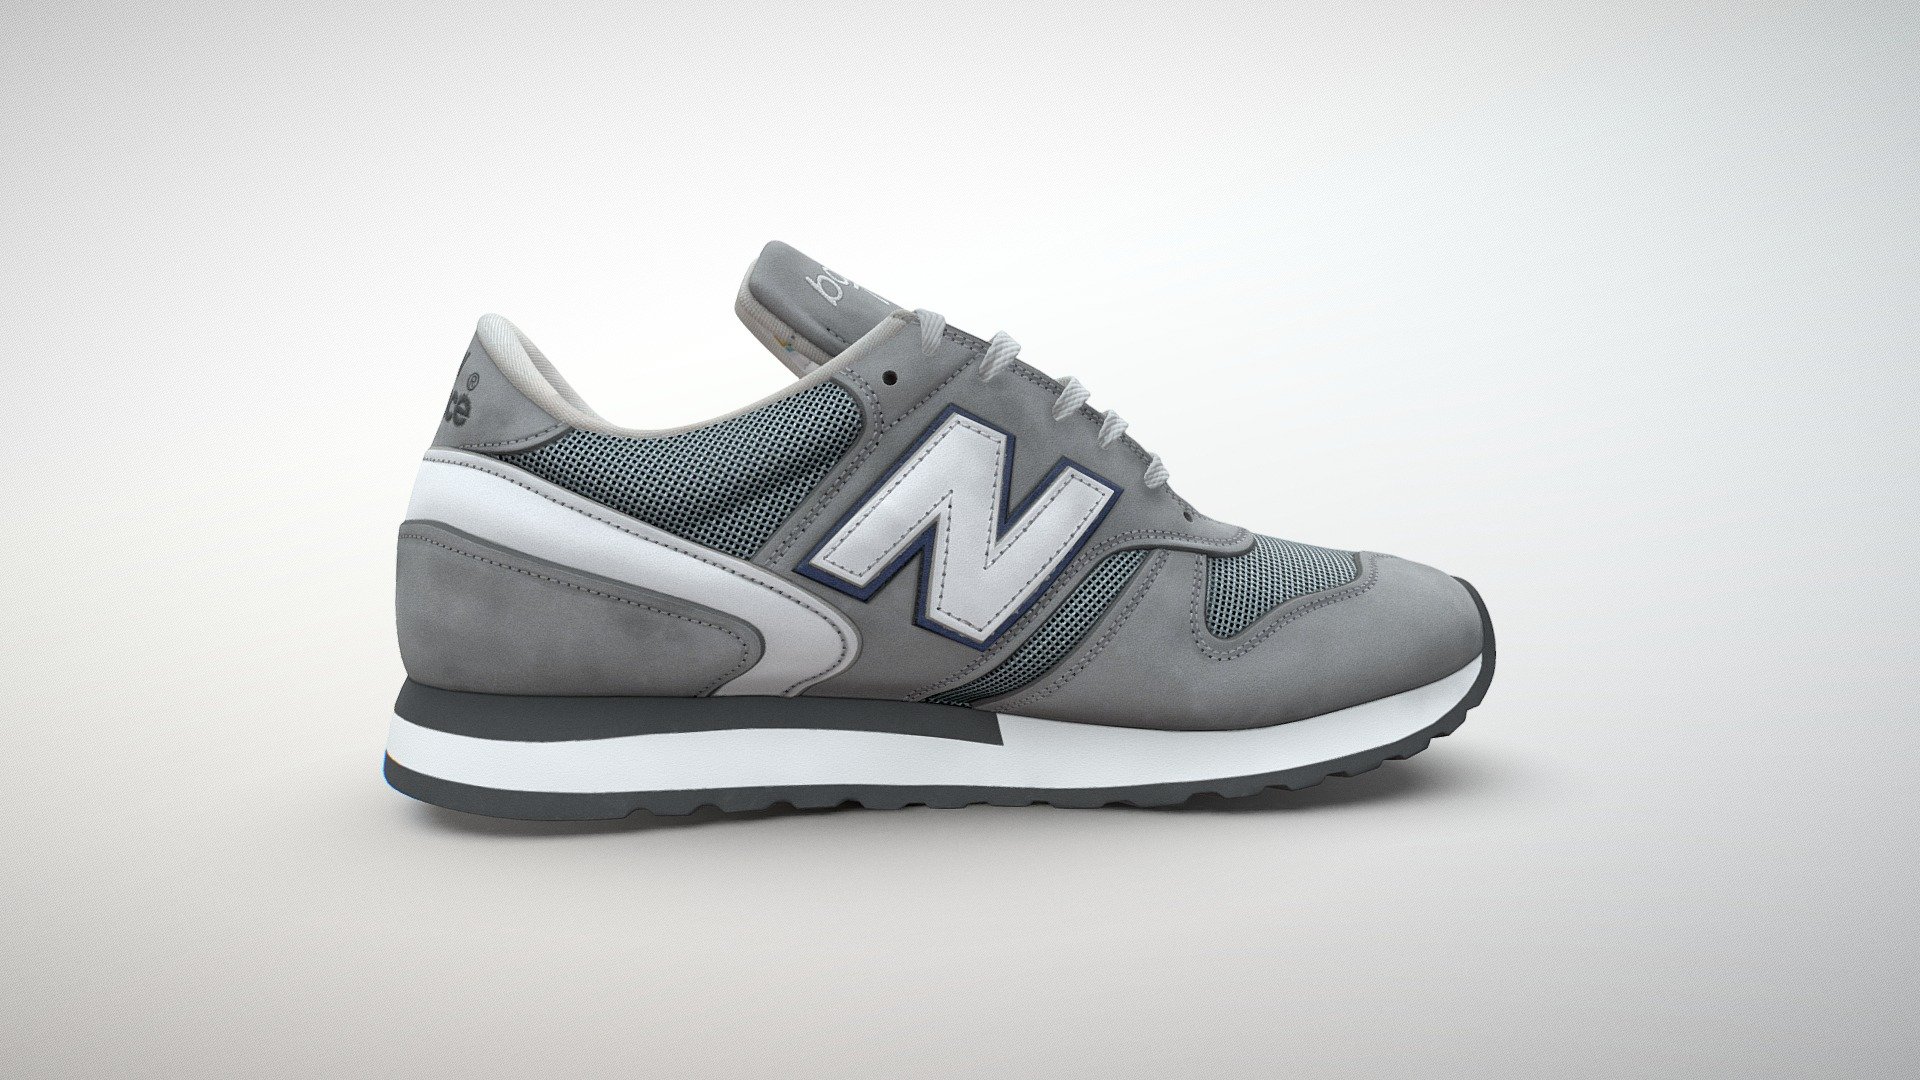 New Balance shoe model
Game and VR ready for high-quality Architectural Visualization and fashion - NEW BALANCE Shoe Model - 3D model by Invrsion 3d model